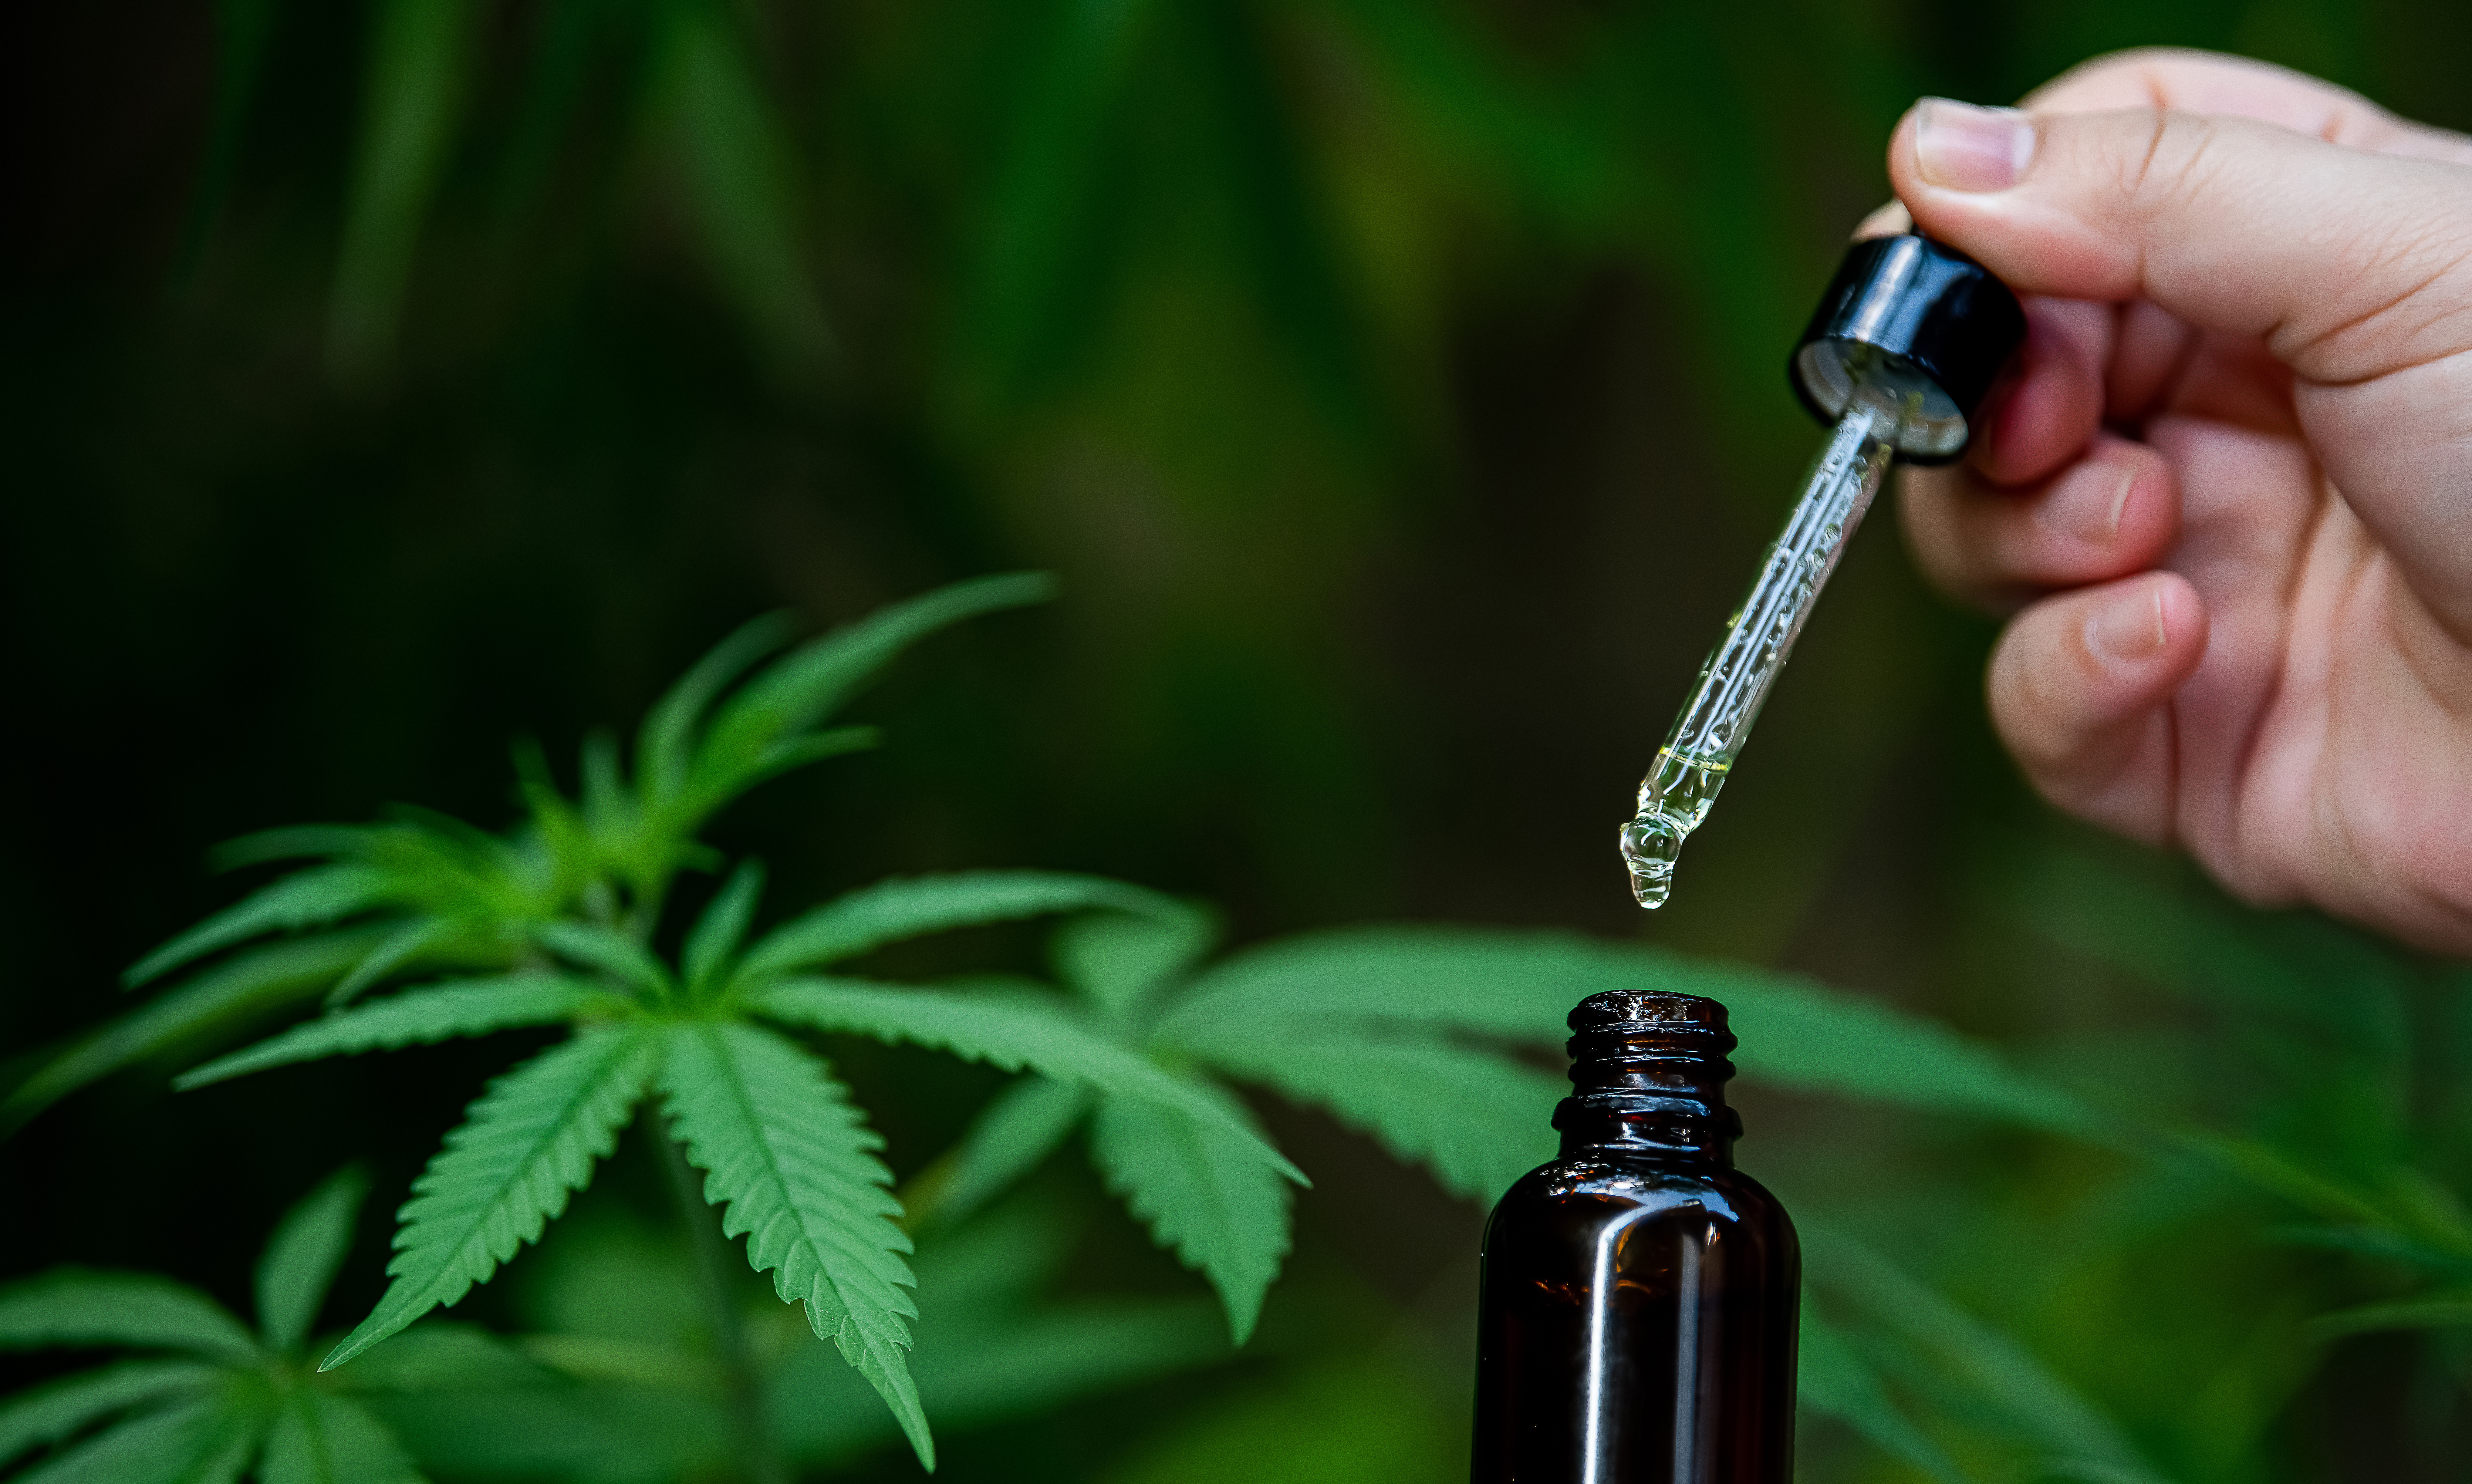 5 Quick Tips for Finding Safety & Effective CBD Products